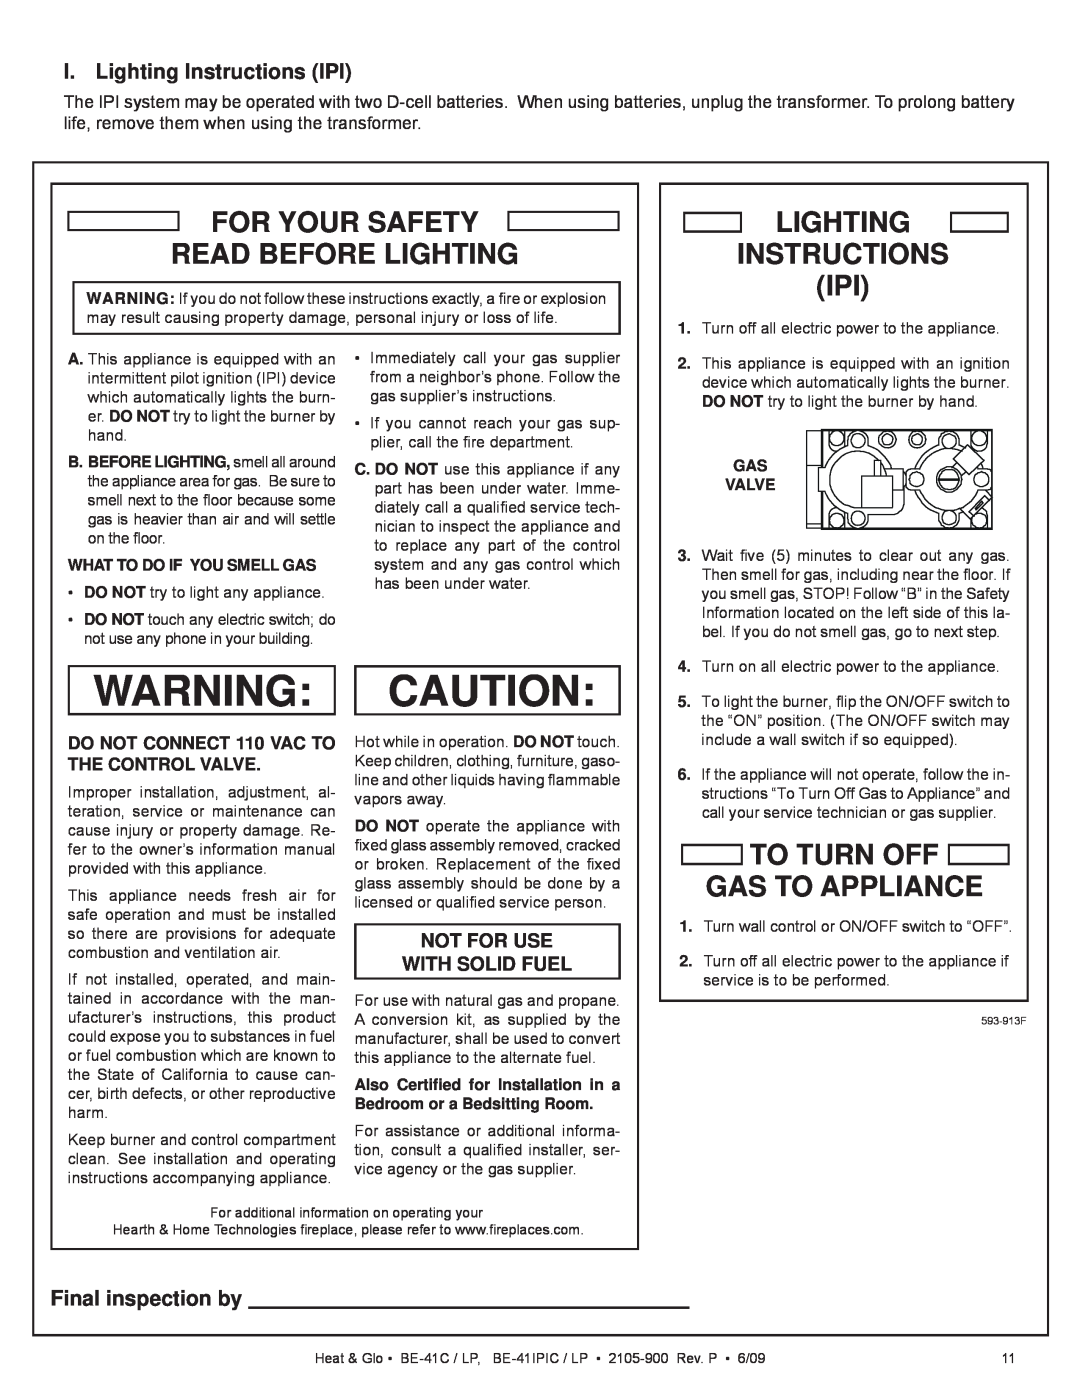 Heat & Glo LifeStyle BE-41IPILPC, BE-41C Warning: Caution, For Your Safety Read Before Lighting, Lighting Instructions Ipi 